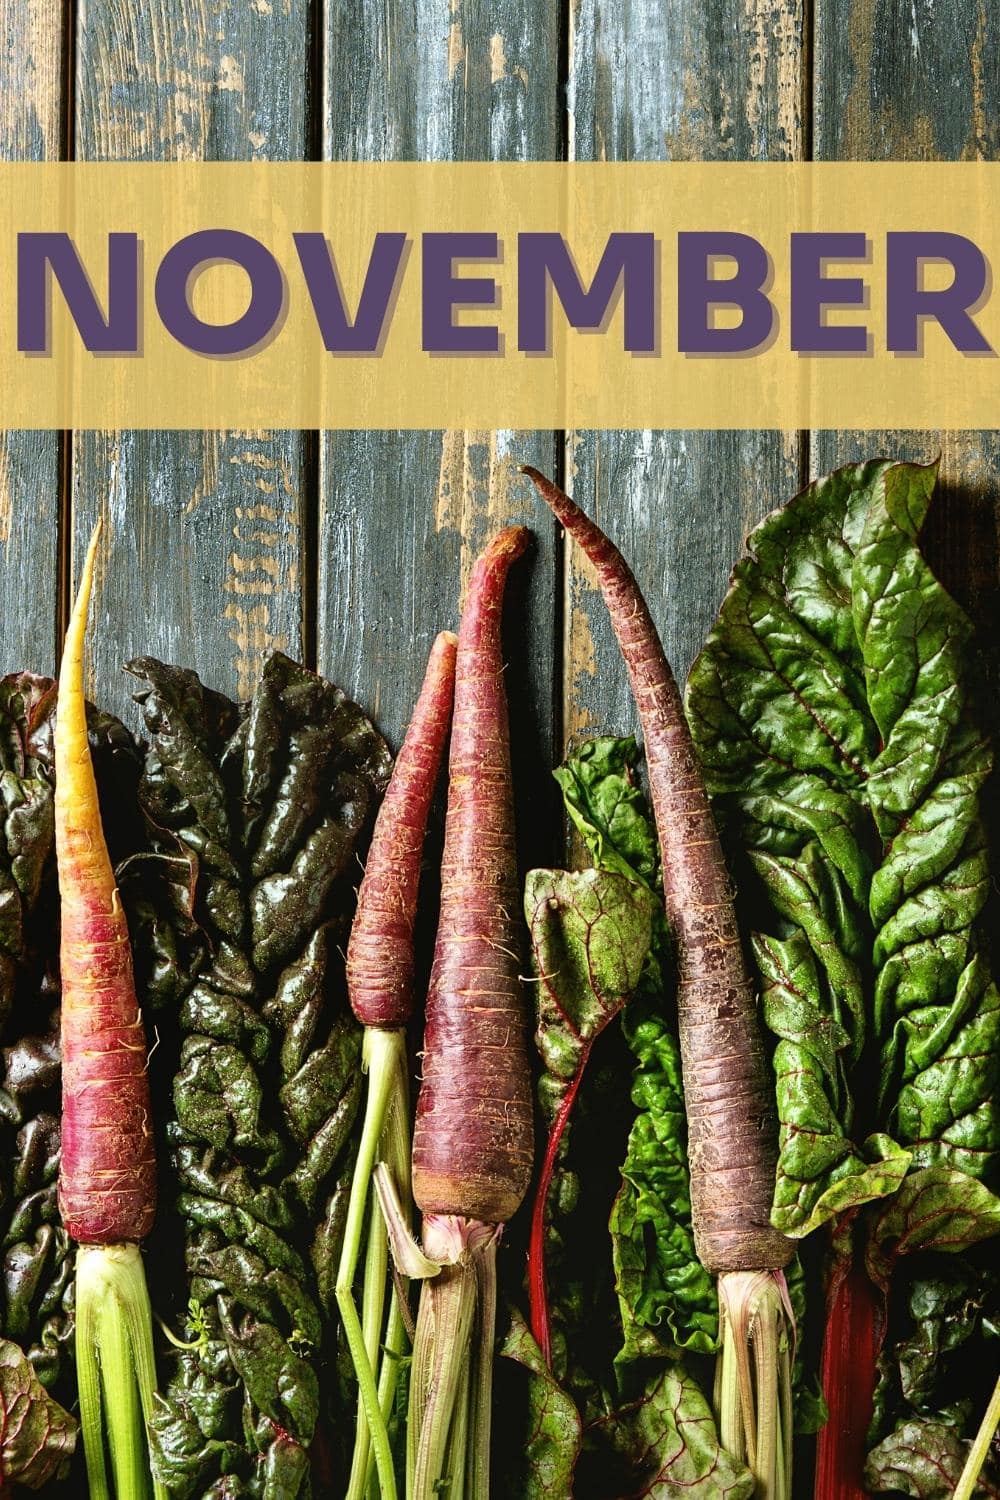 Seasonal Produce Guide: What Fruits & Vegetables Are In Season Now?